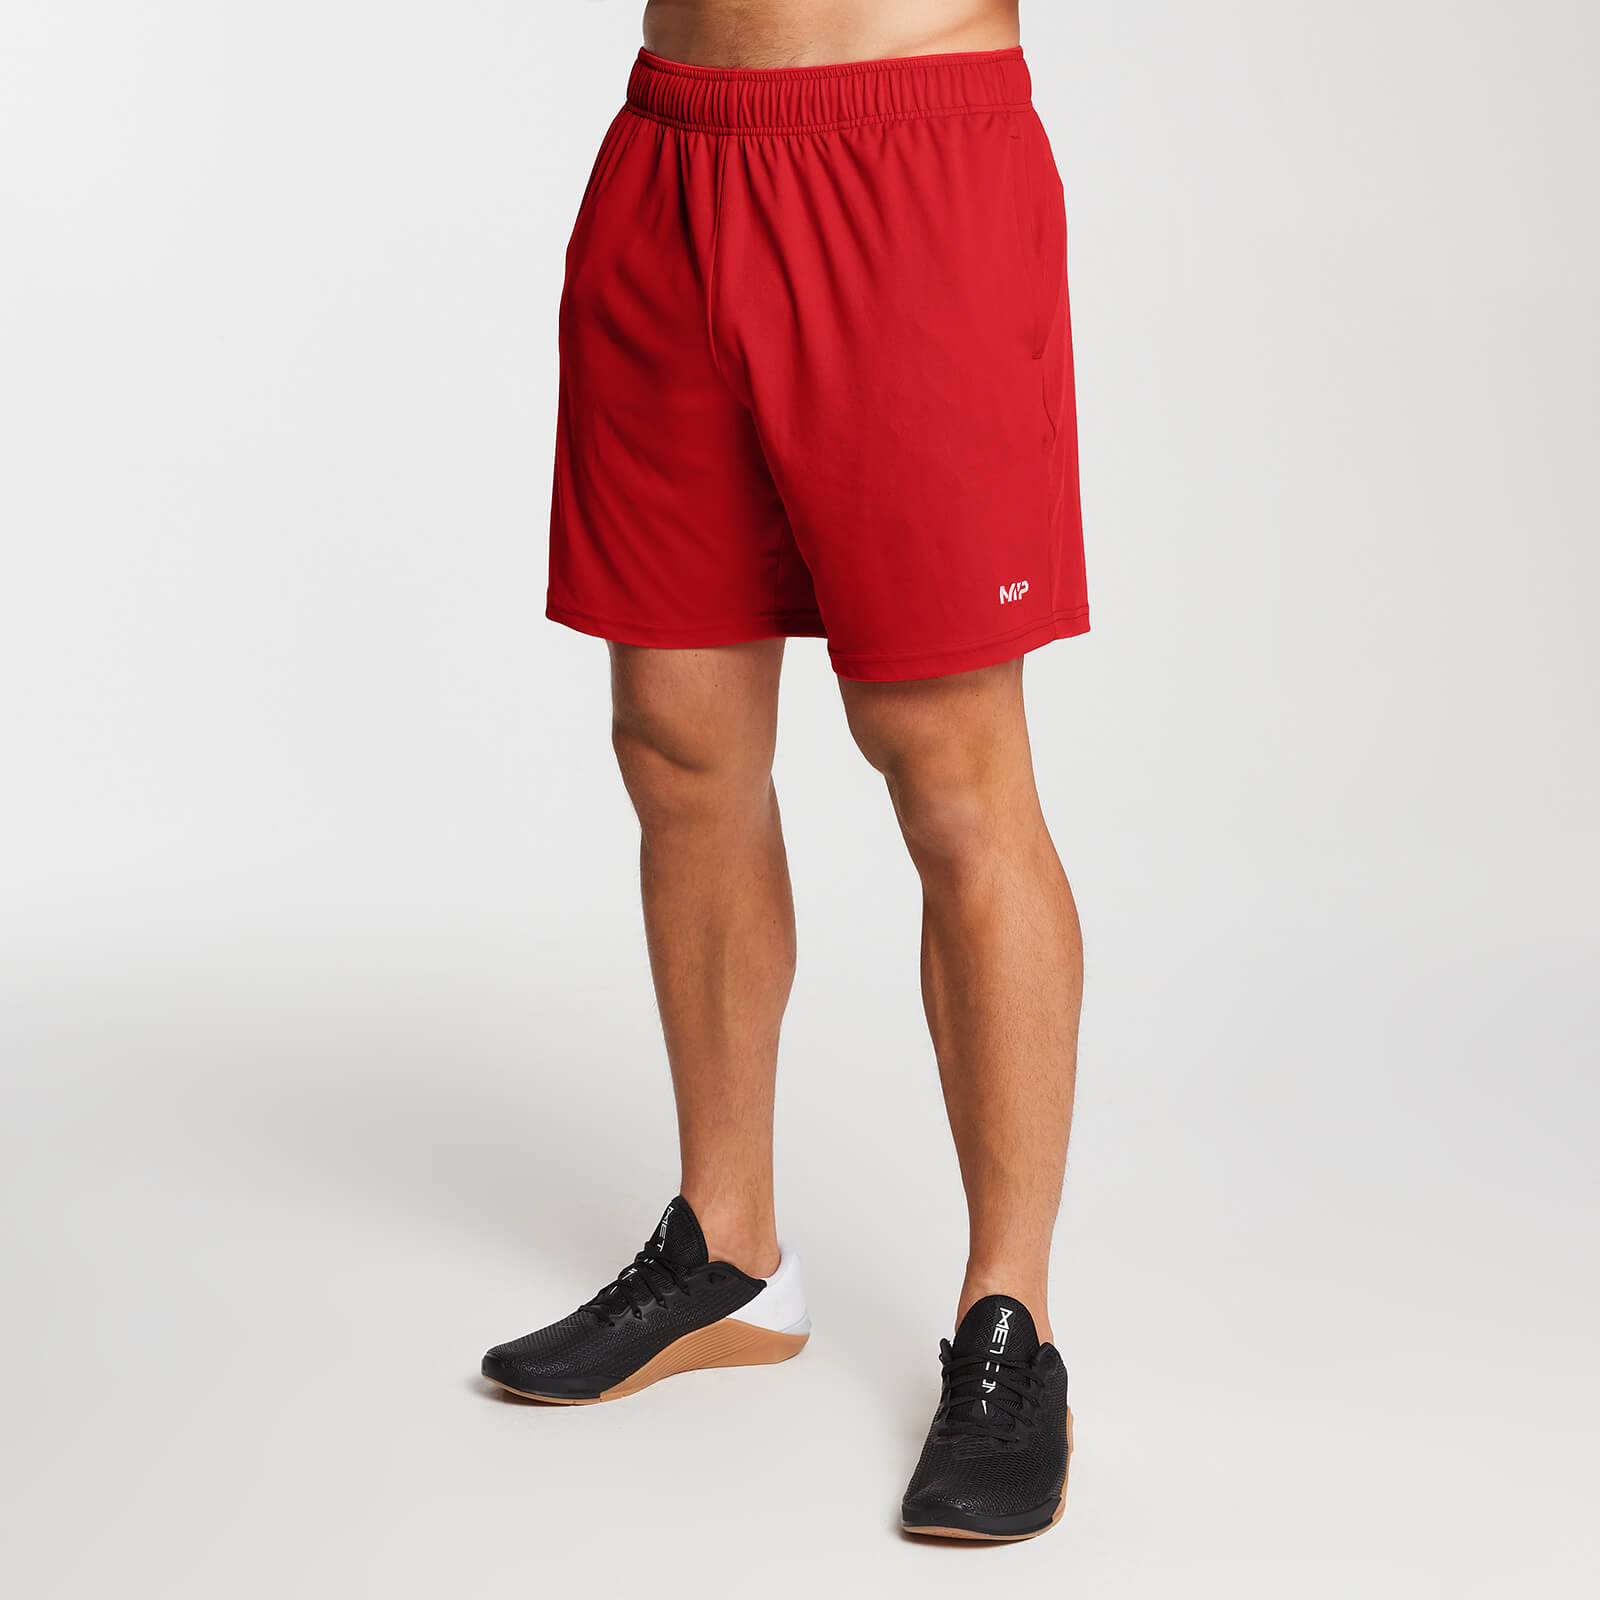 Pantaloncini Training Essential Lightweight Jersey - Rosso acceso - M